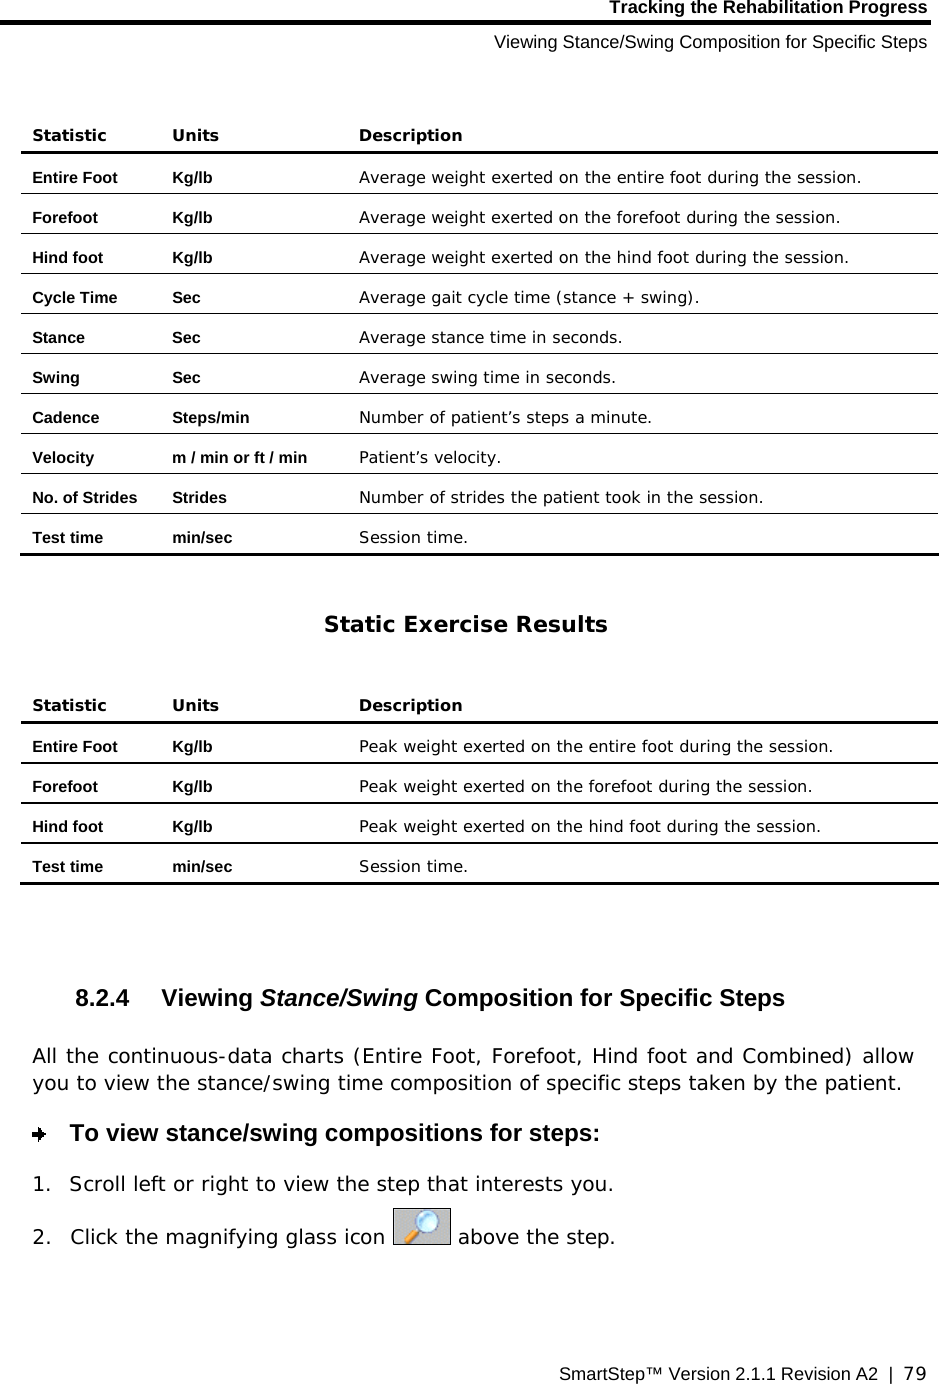 Tracking the Rehabilitation Progress Viewing Stance/Swing Composition for Specific Steps SmartStep™ Version 2.1.1 Revision A2  |  79   Statistic Units  Description Entire Foot  Kg/lb  Average weight exerted on the entire foot during the session. Forefoot Kg/lb  Average weight exerted on the forefoot during the session. Hind foot  Kg/lb  Average weight exerted on the hind foot during the session. Cycle Time  Sec  Average gait cycle time (stance + swing). Stance Sec  Average stance time in seconds. Swing Sec  Average swing time in seconds. Cadence Steps/min  Number of patient’s steps a minute. Velocity  m / min or ft / min  Patient’s velocity. No. of Strides  Strides  Number of strides the patient took in the session. Test time  min/sec  Session time.   Static Exercise Results   Statistic Units  Description Entire Foot  Kg/lb  Peak weight exerted on the entire foot during the session. Forefoot Kg/lb  Peak weight exerted on the forefoot during the session. Hind foot  Kg/lb  Peak weight exerted on the hind foot during the session. Test time  min/sec  Session time.    8.2.4 Viewing Stance/Swing Composition for Specific Steps All the continuous-data charts (Entire Foot, Forefoot, Hind foot and Combined) allow you to view the stance/swing time composition of specific steps taken by the patient.    To view stance/swing compositions for steps: 1.  Scroll left or right to view the step that interests you. 2.  Click the magnifying glass icon   above the step.   